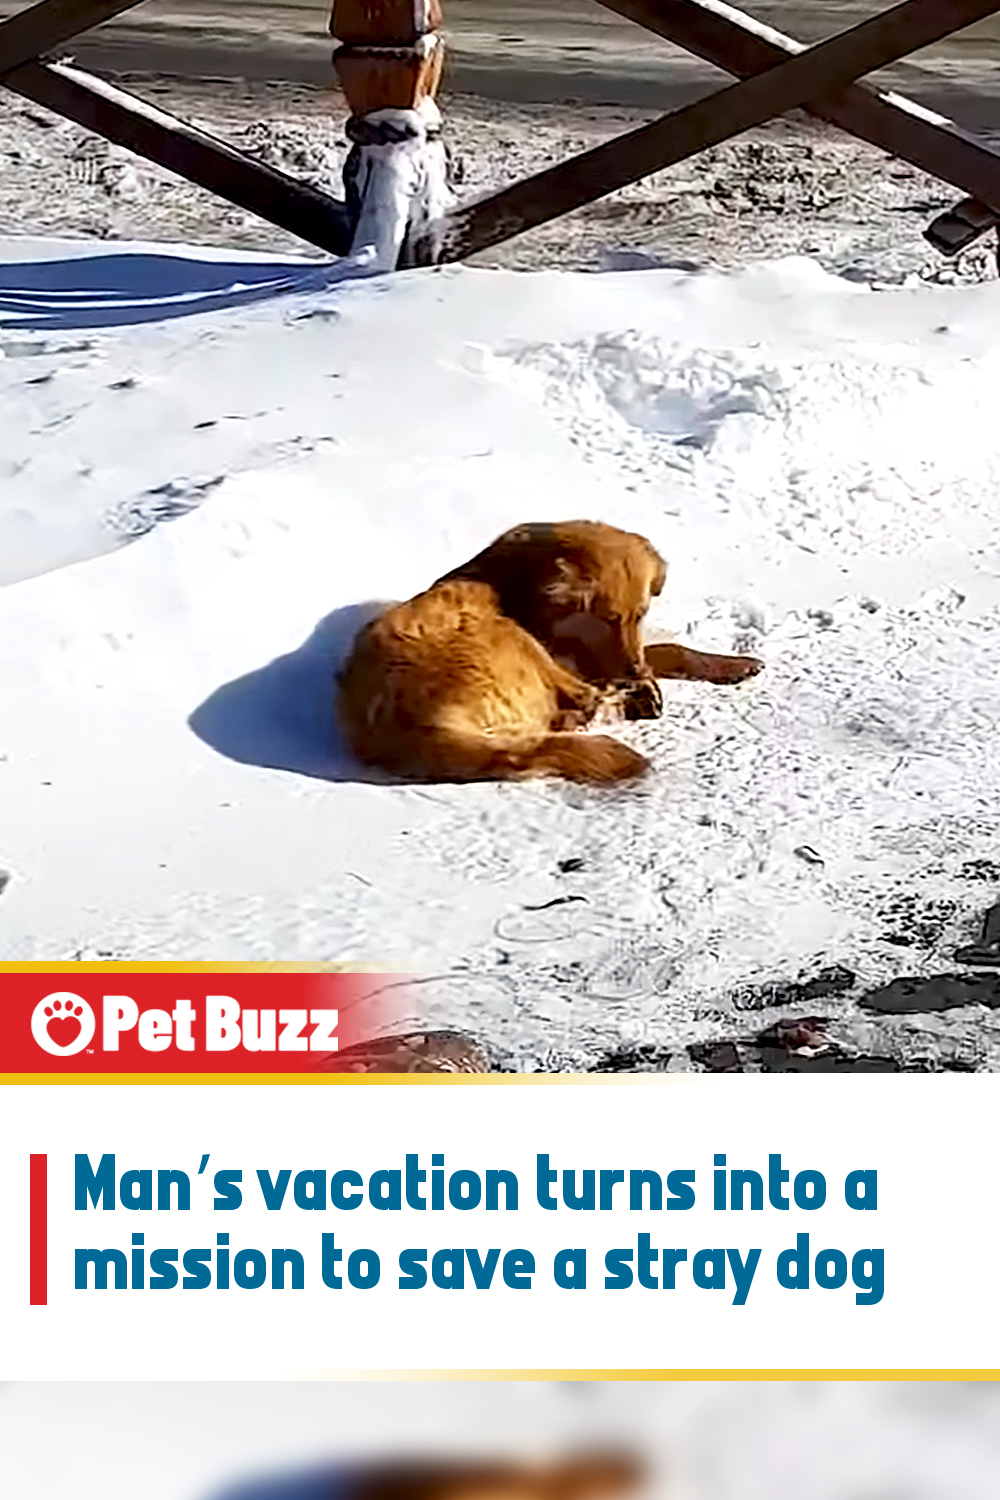 Man’s vacation turns into a mission to save a stray dog